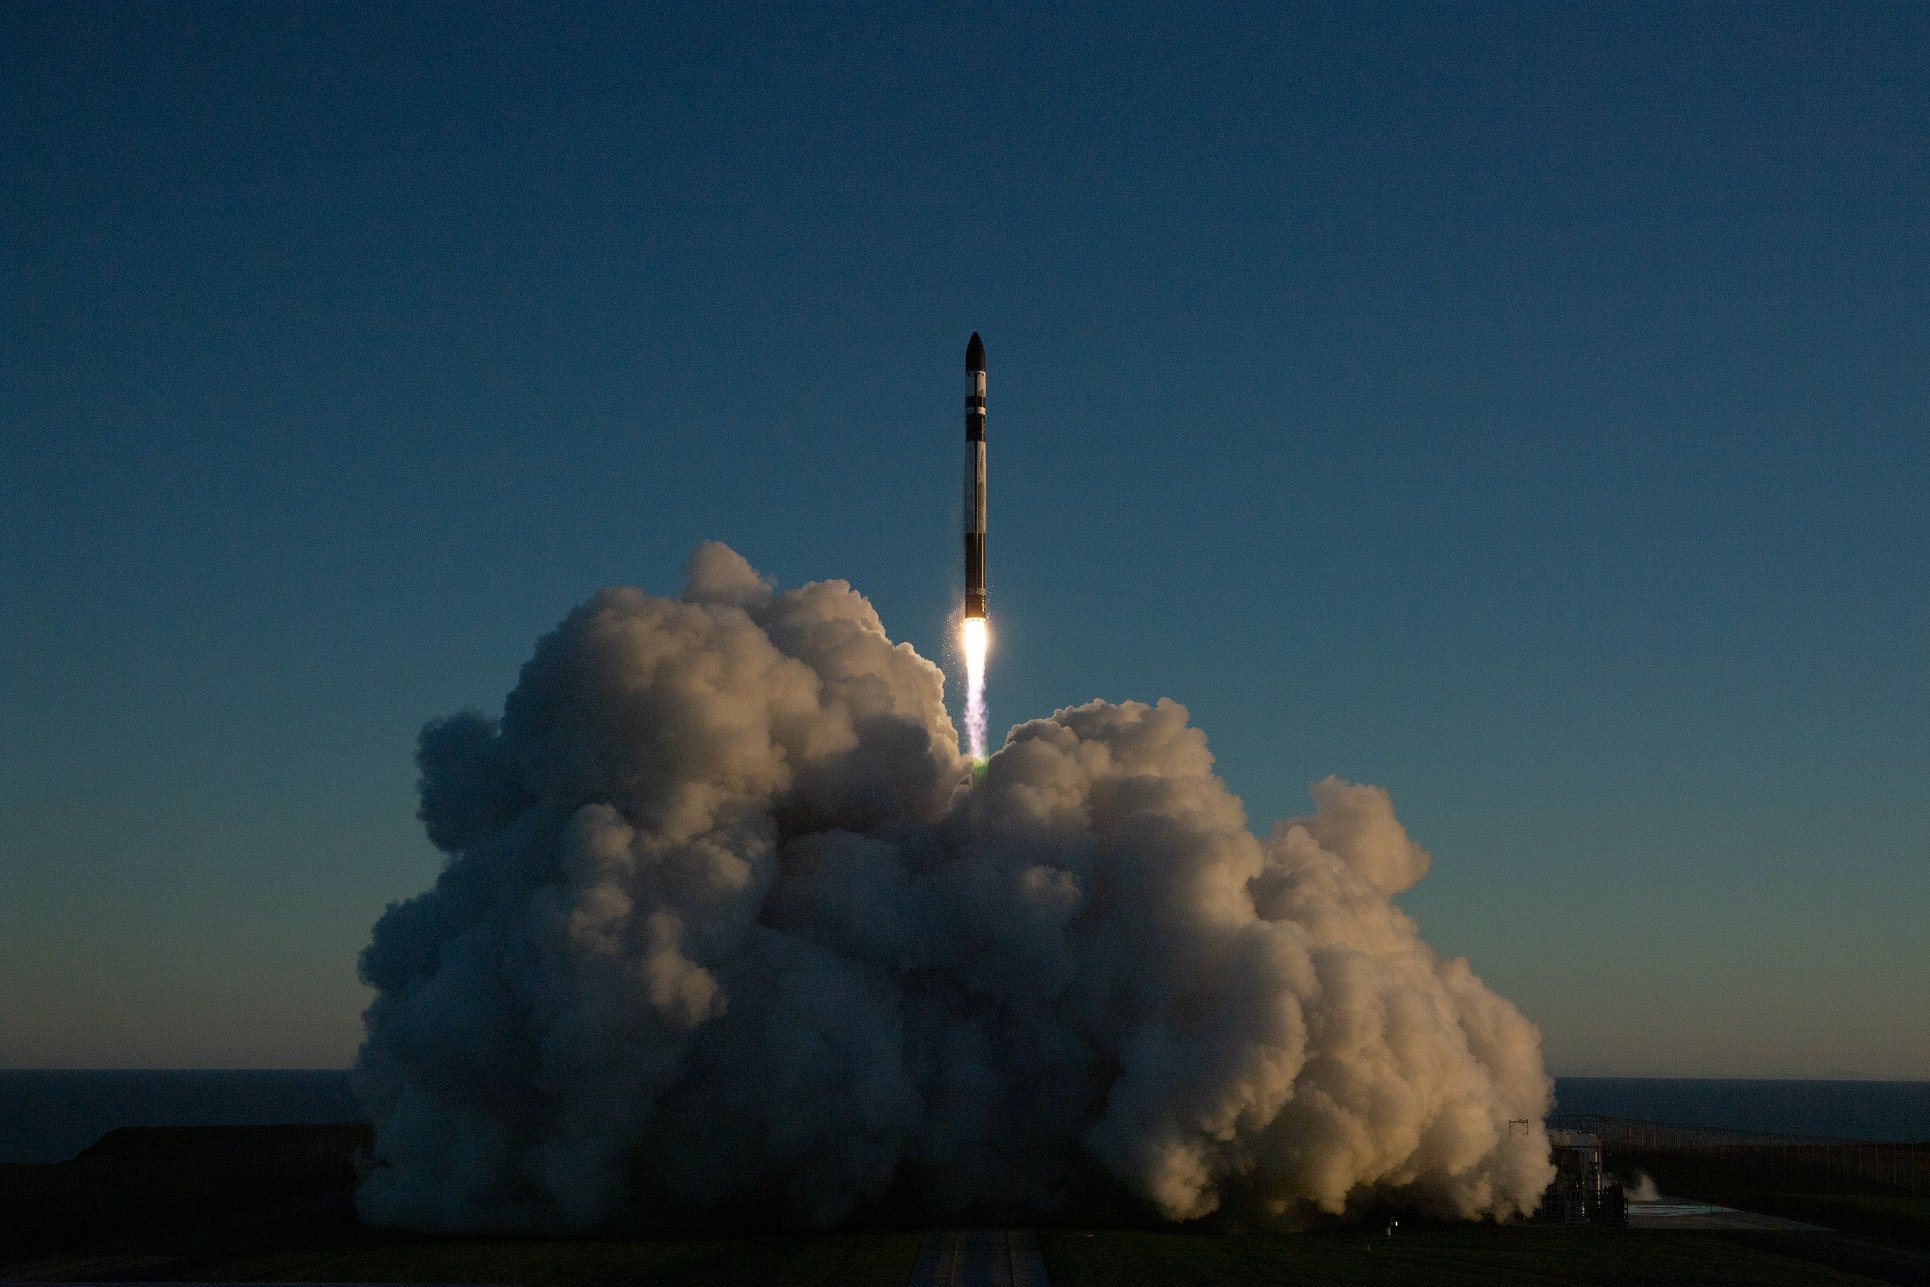 Rocket Lab is going to catch their missiles with a helicopter. How do you like Elon Musk?